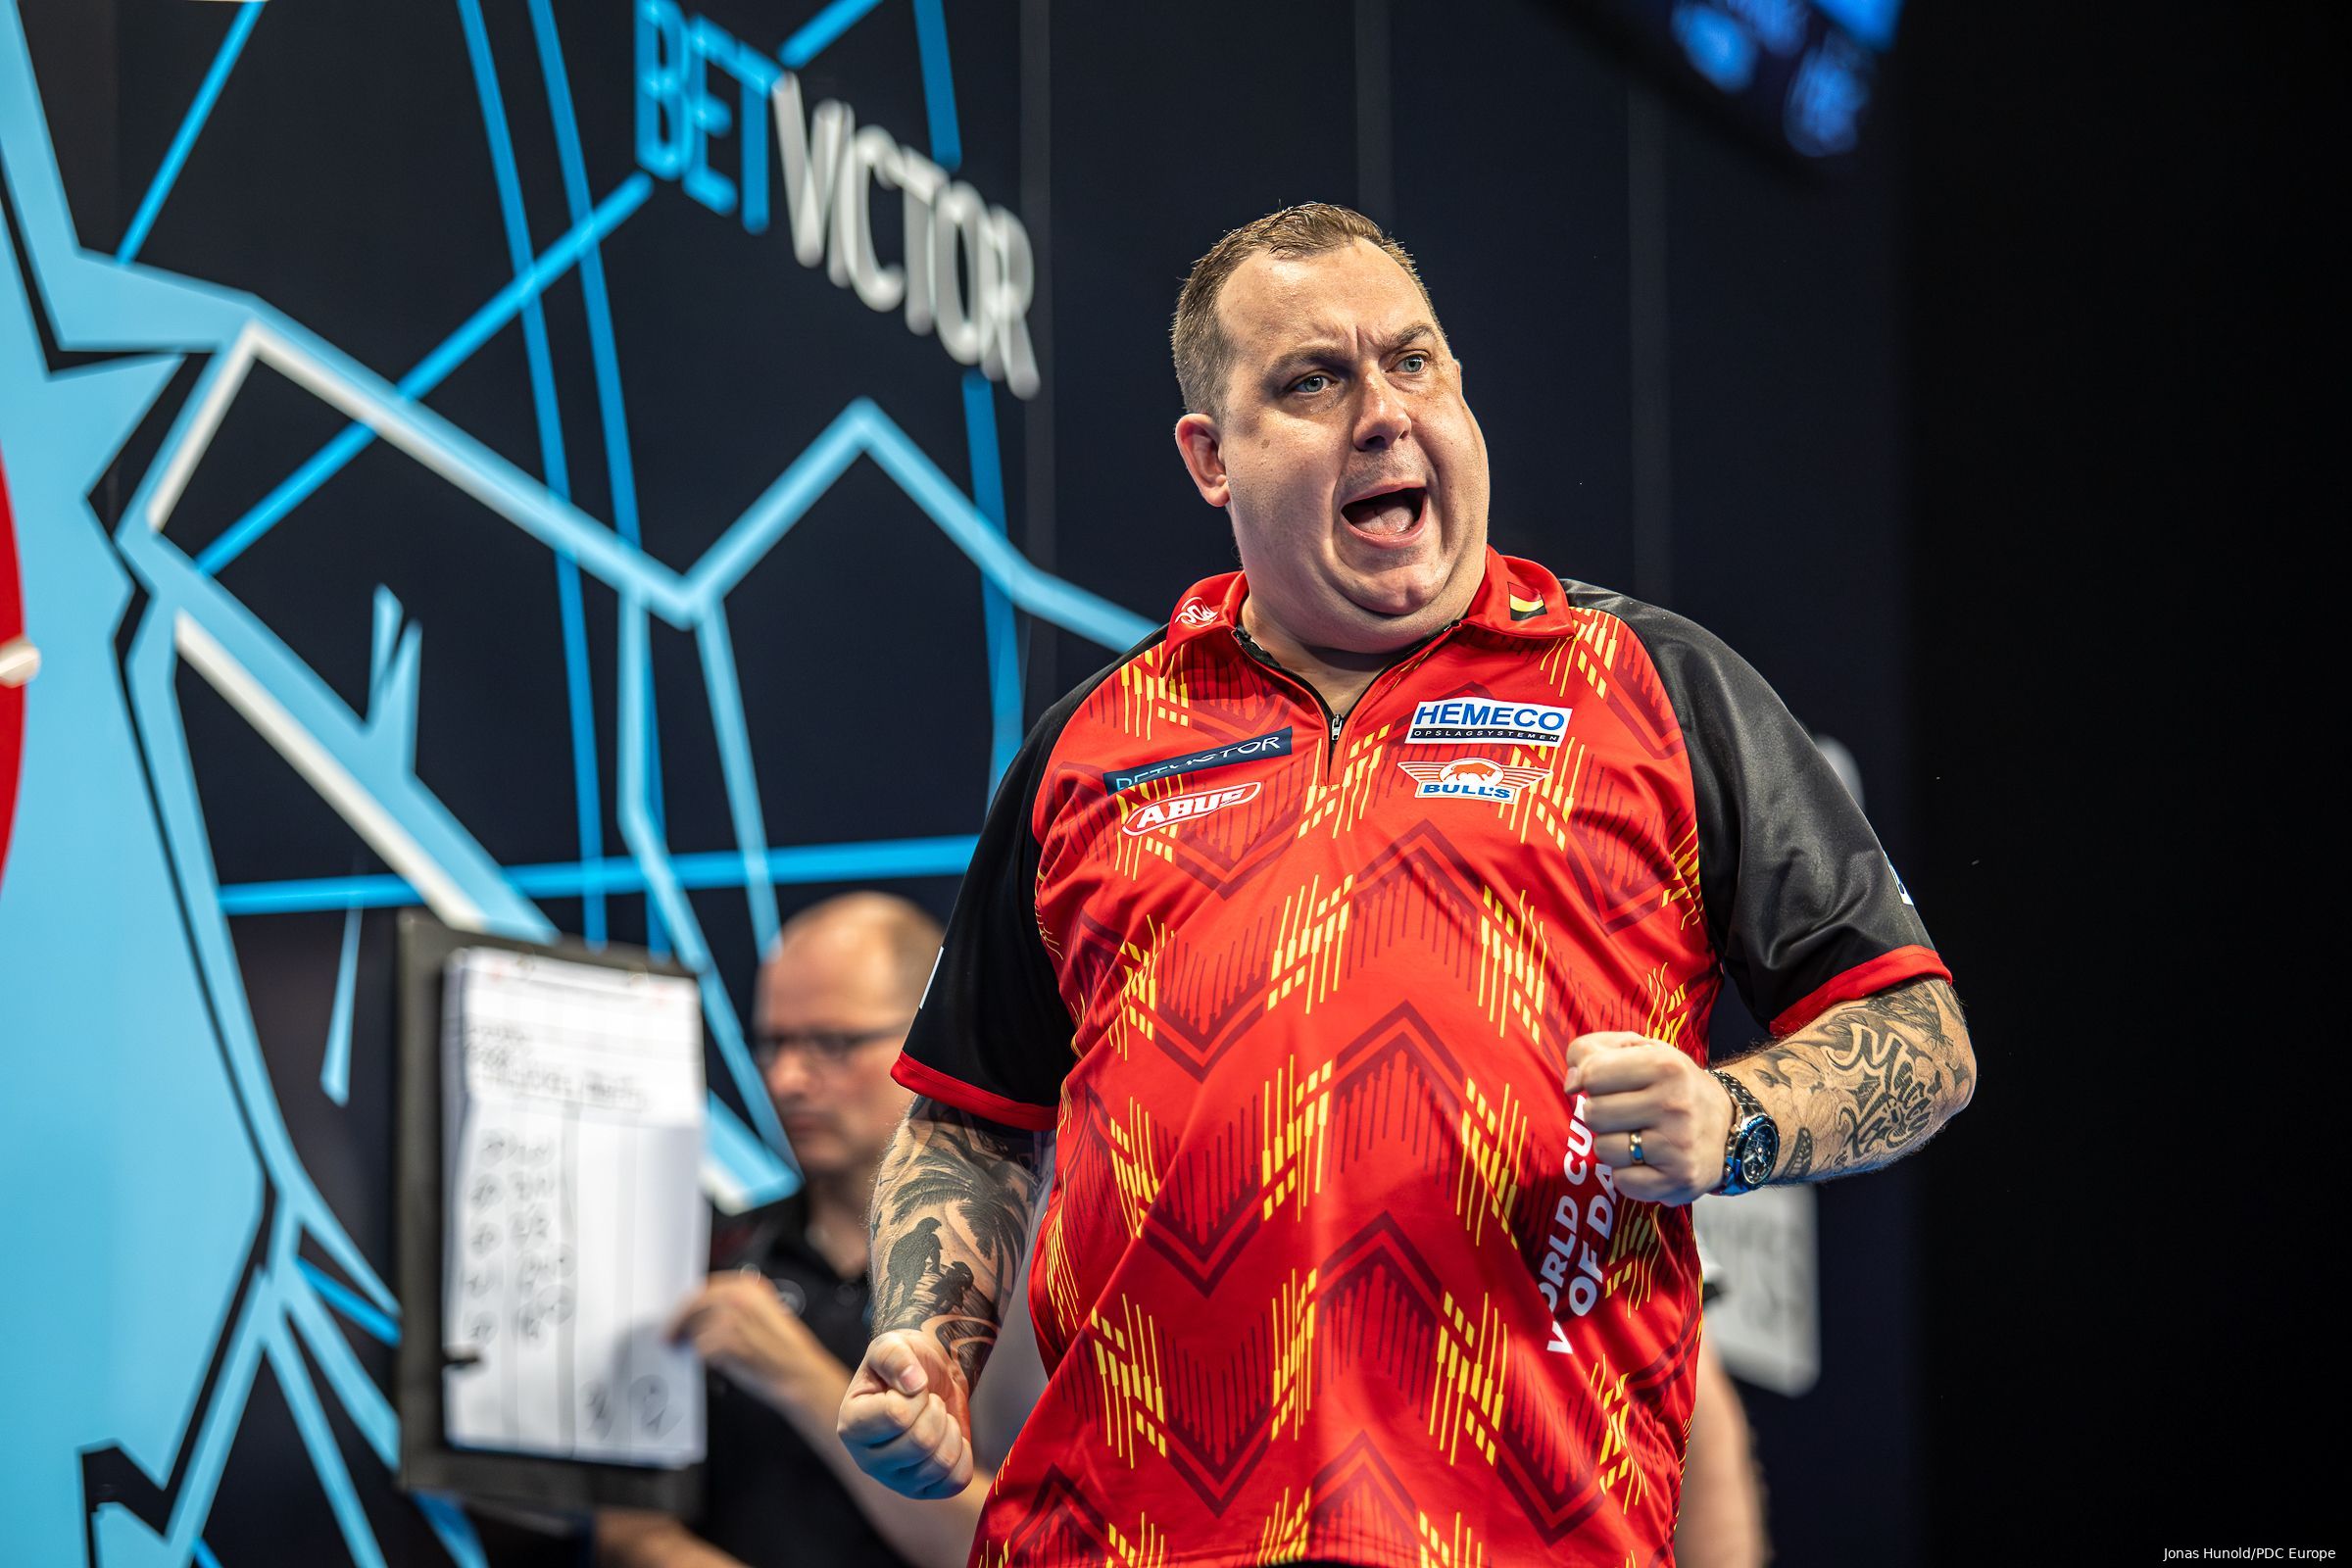 Kim Huybrechts in Aktion beim World Cup of Darts